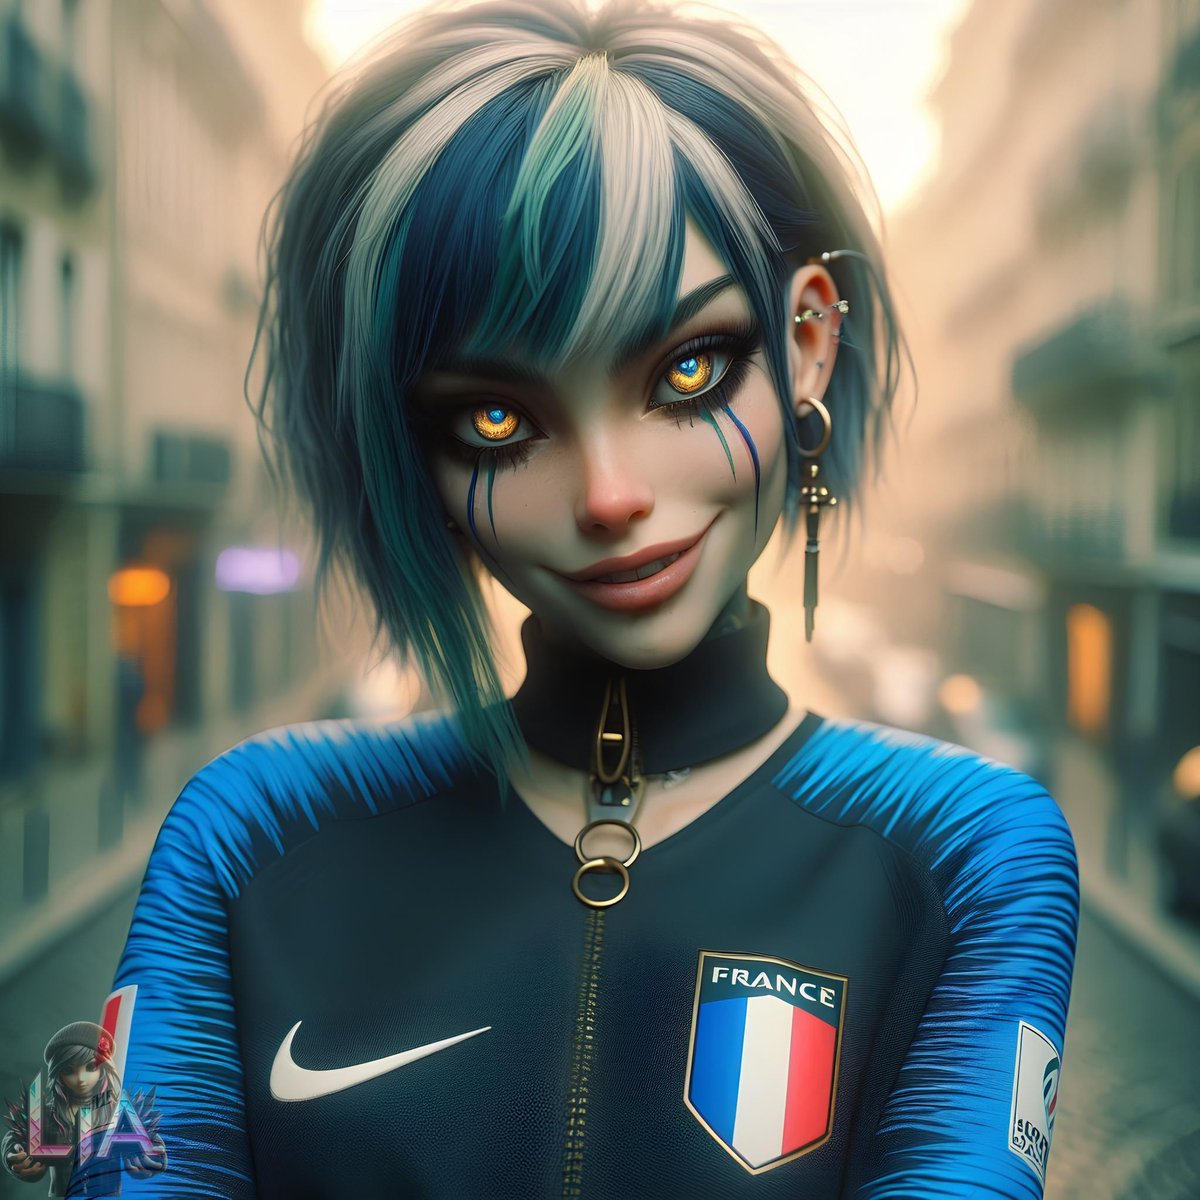 😈Lia😈French Team😈
#AI #aiart #AIArtwork #AIgenerated #aiart #AIArtistCommunity #aiimages #aicreator🖤😈🖤